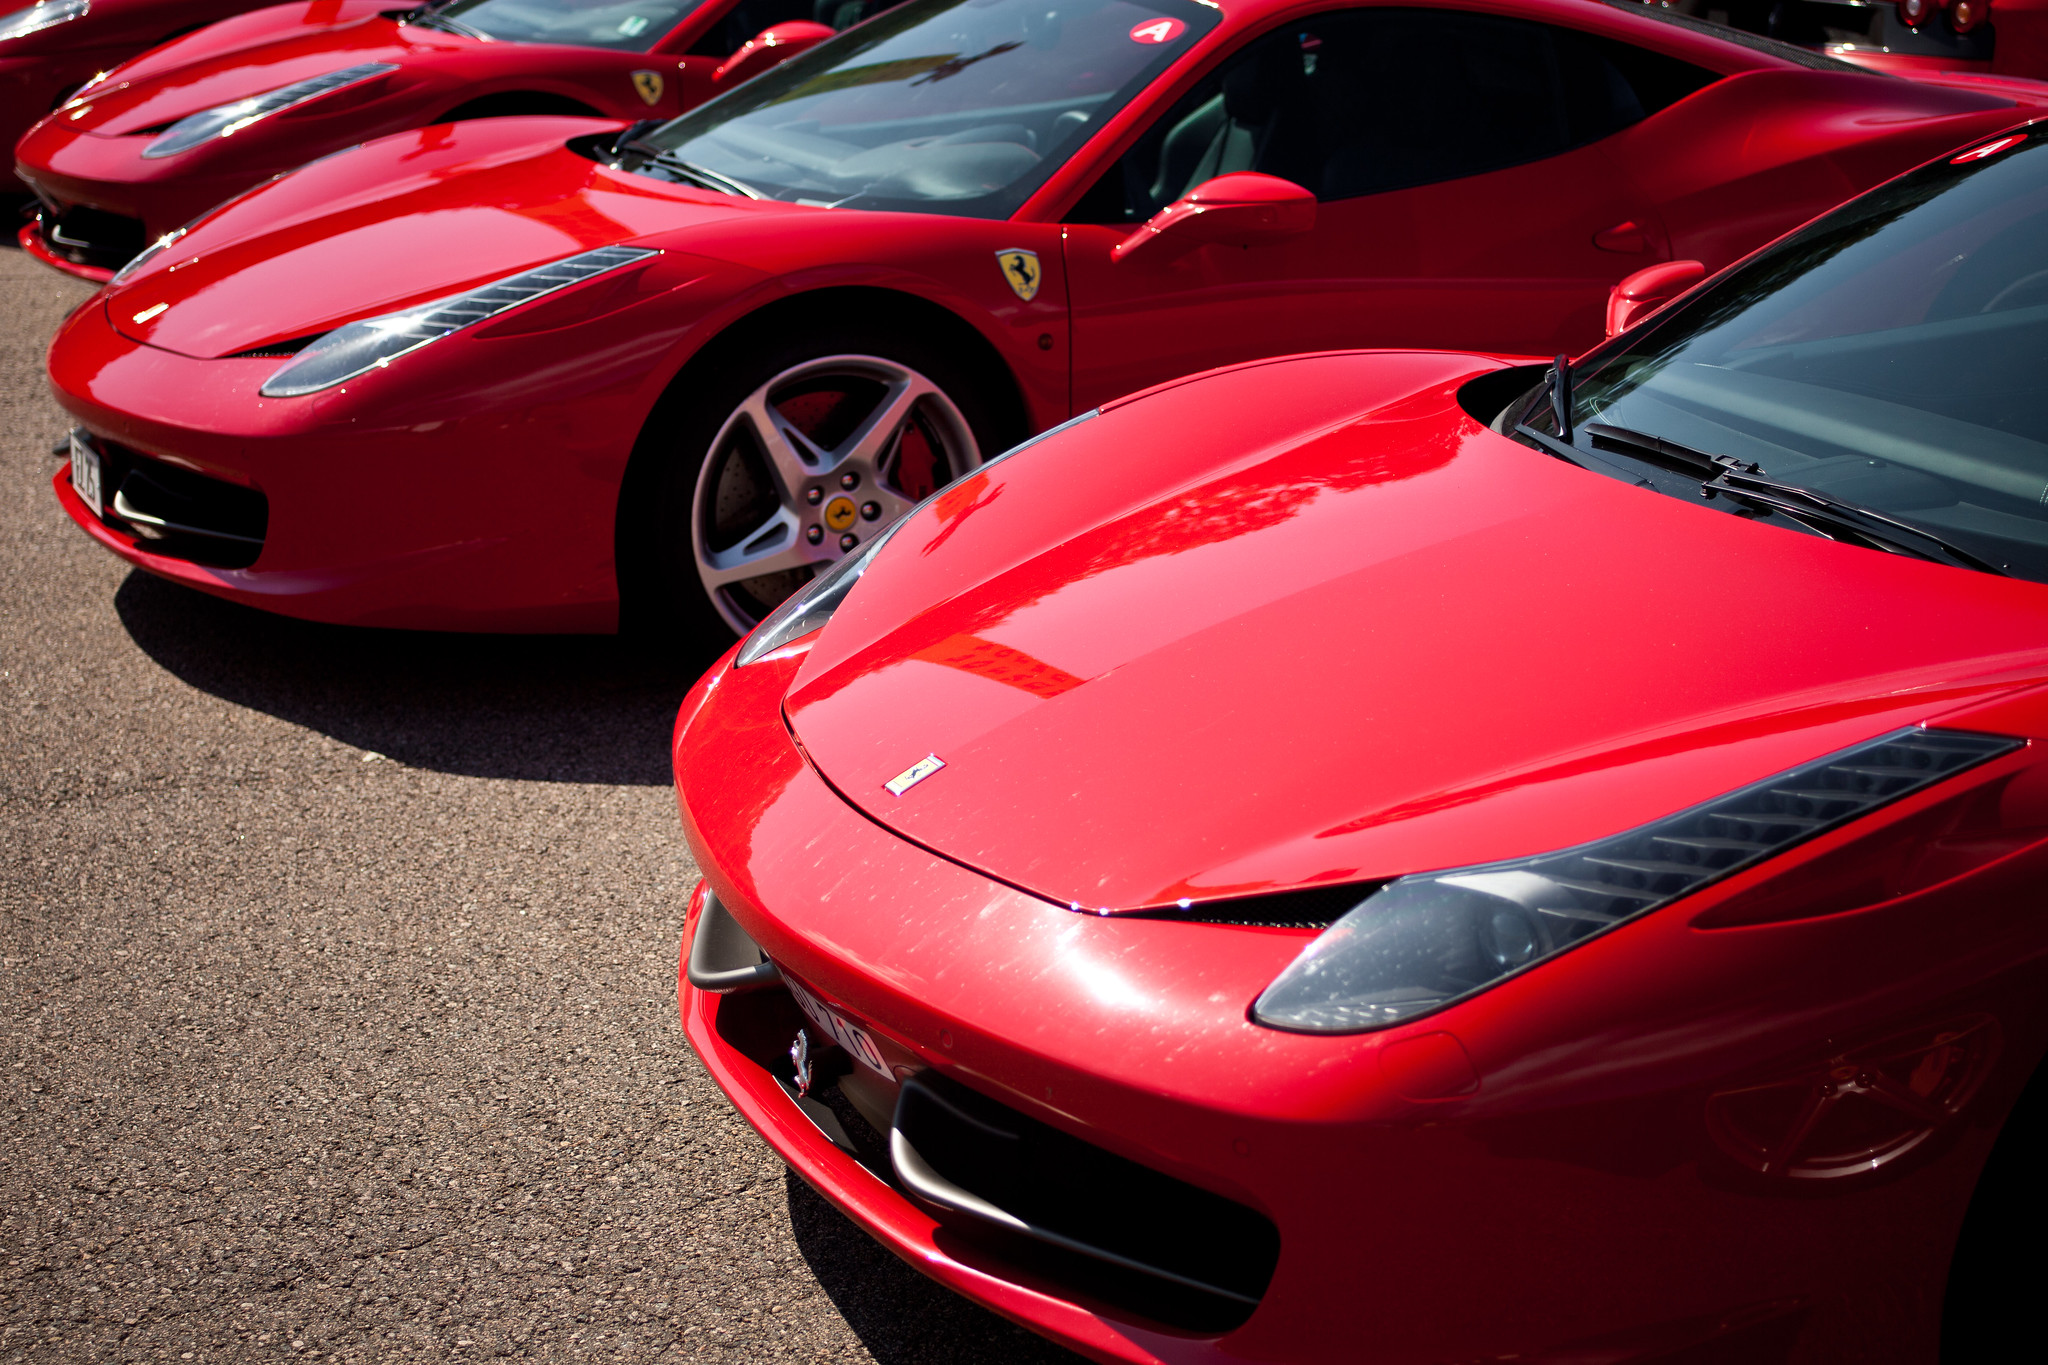 Red Ferrari's lined up.